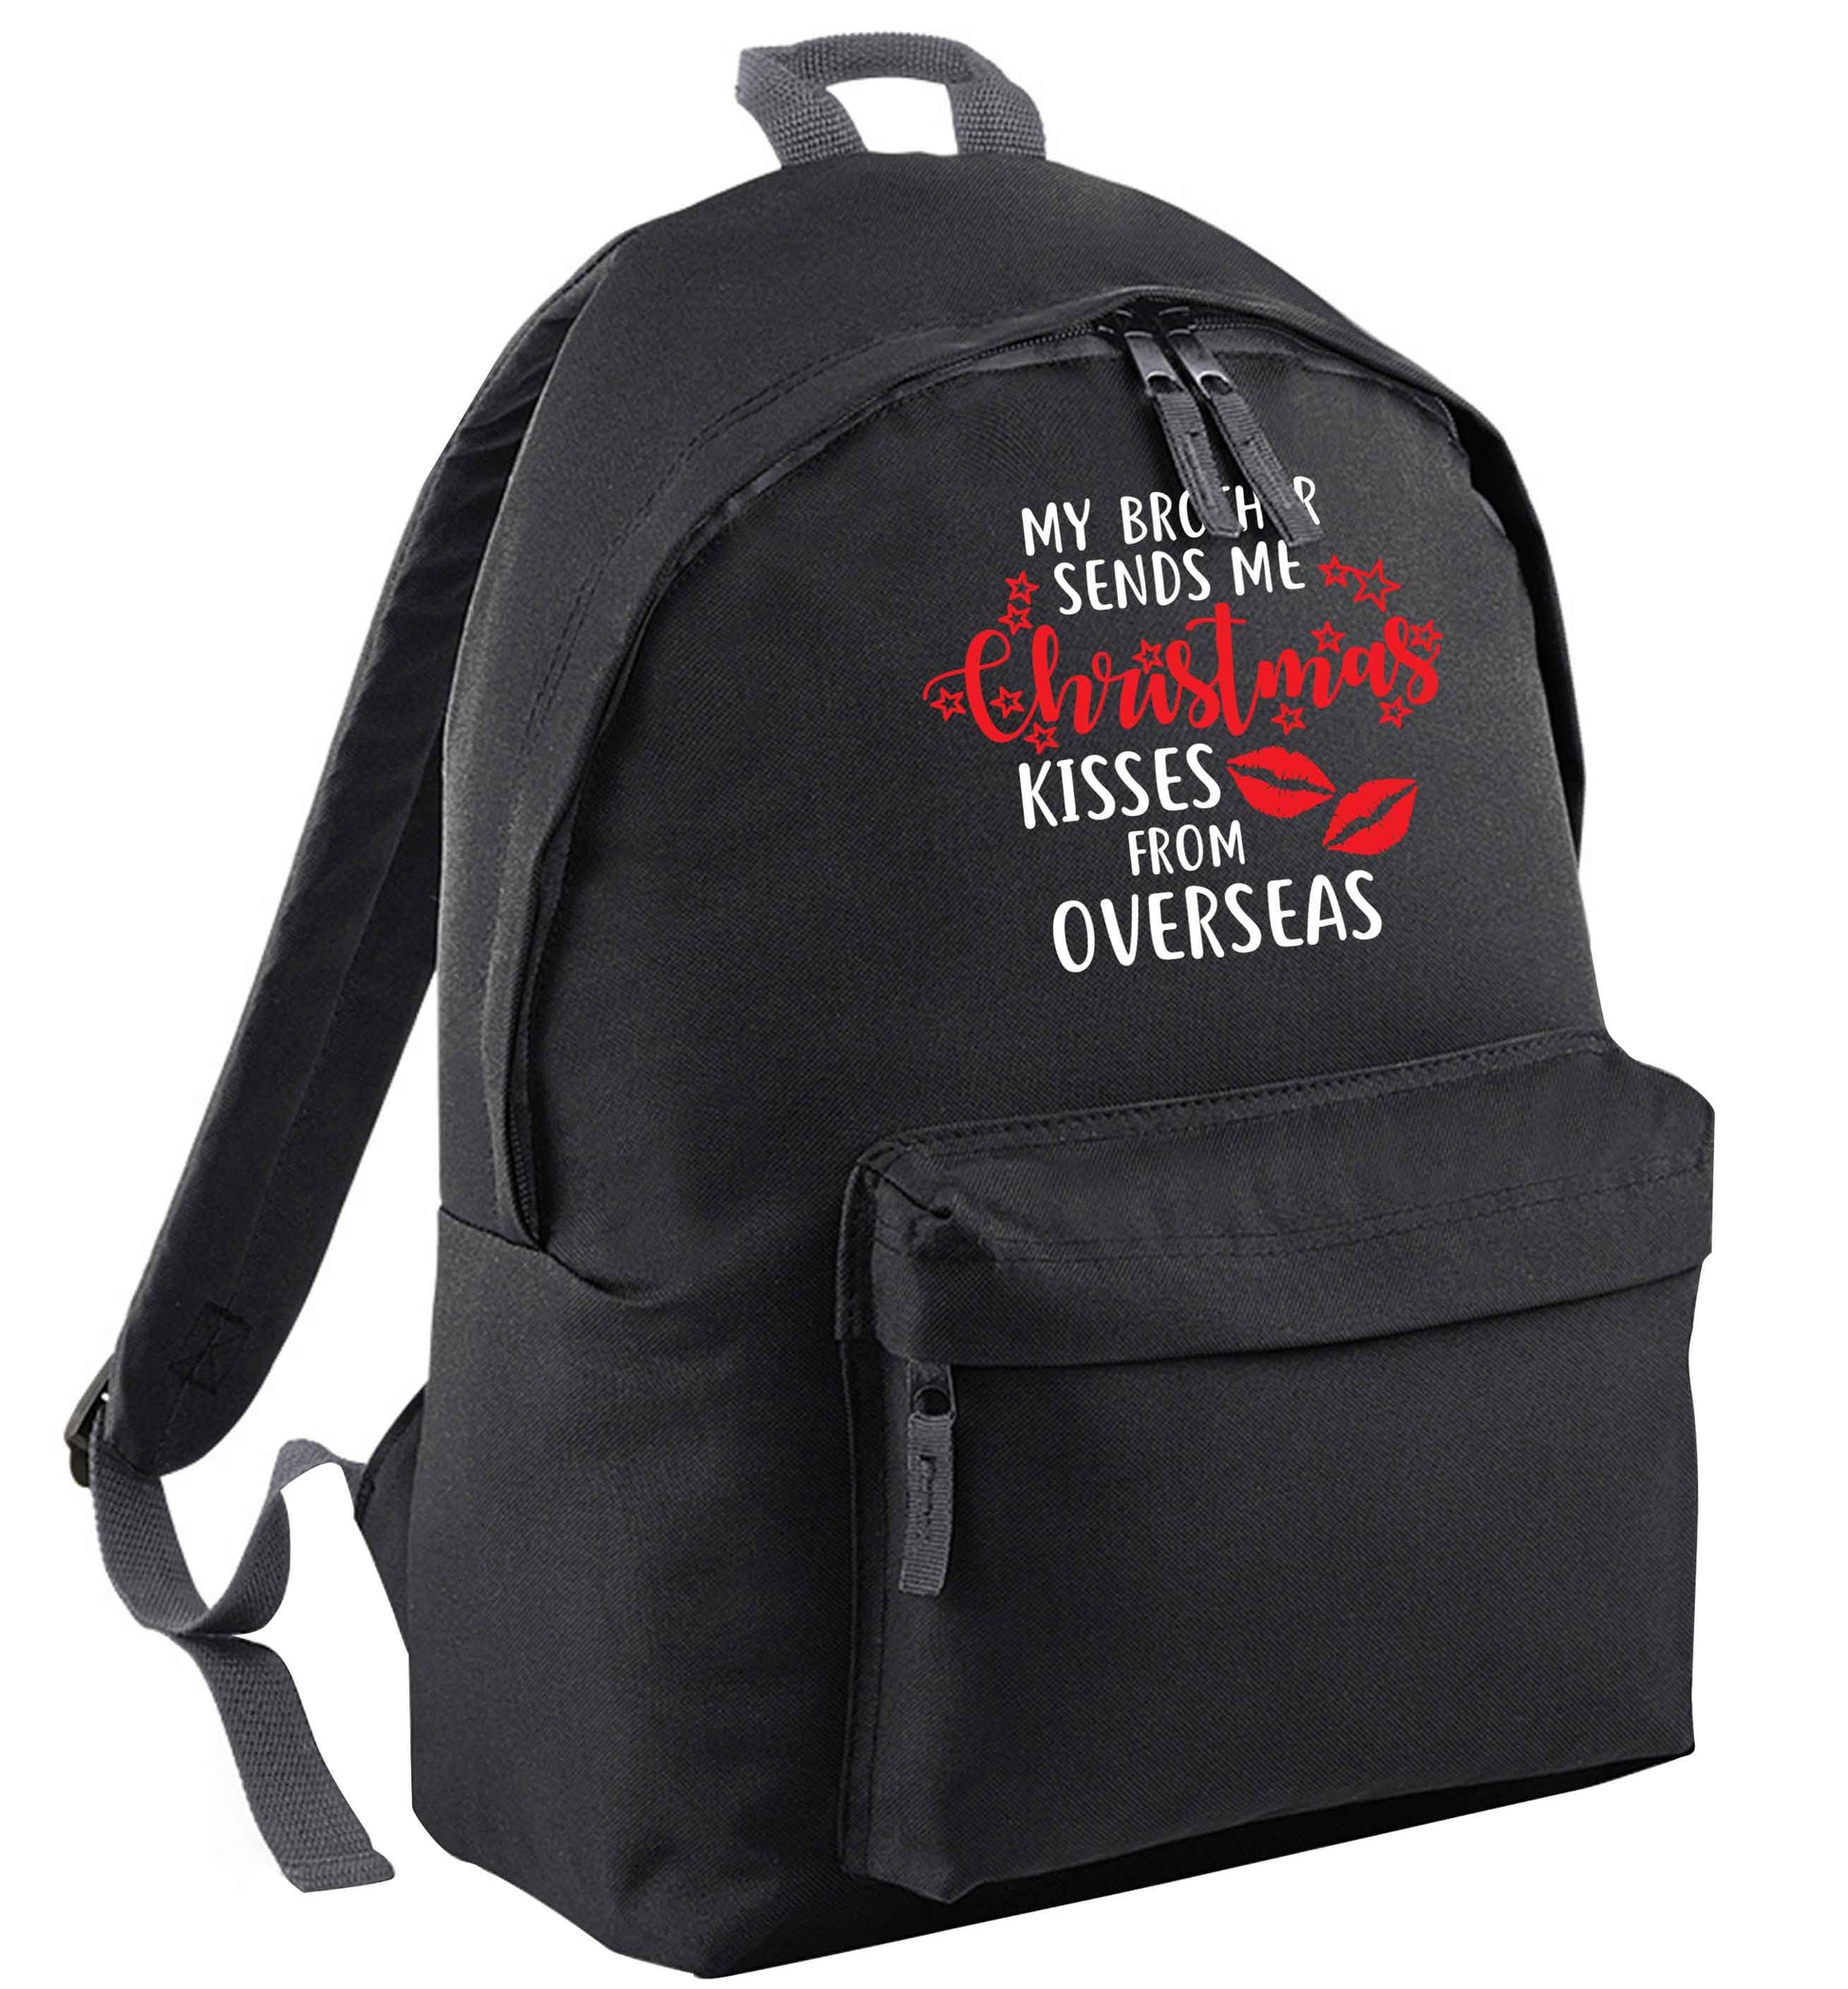 Brother Christmas Kisses Overseas black adults backpack